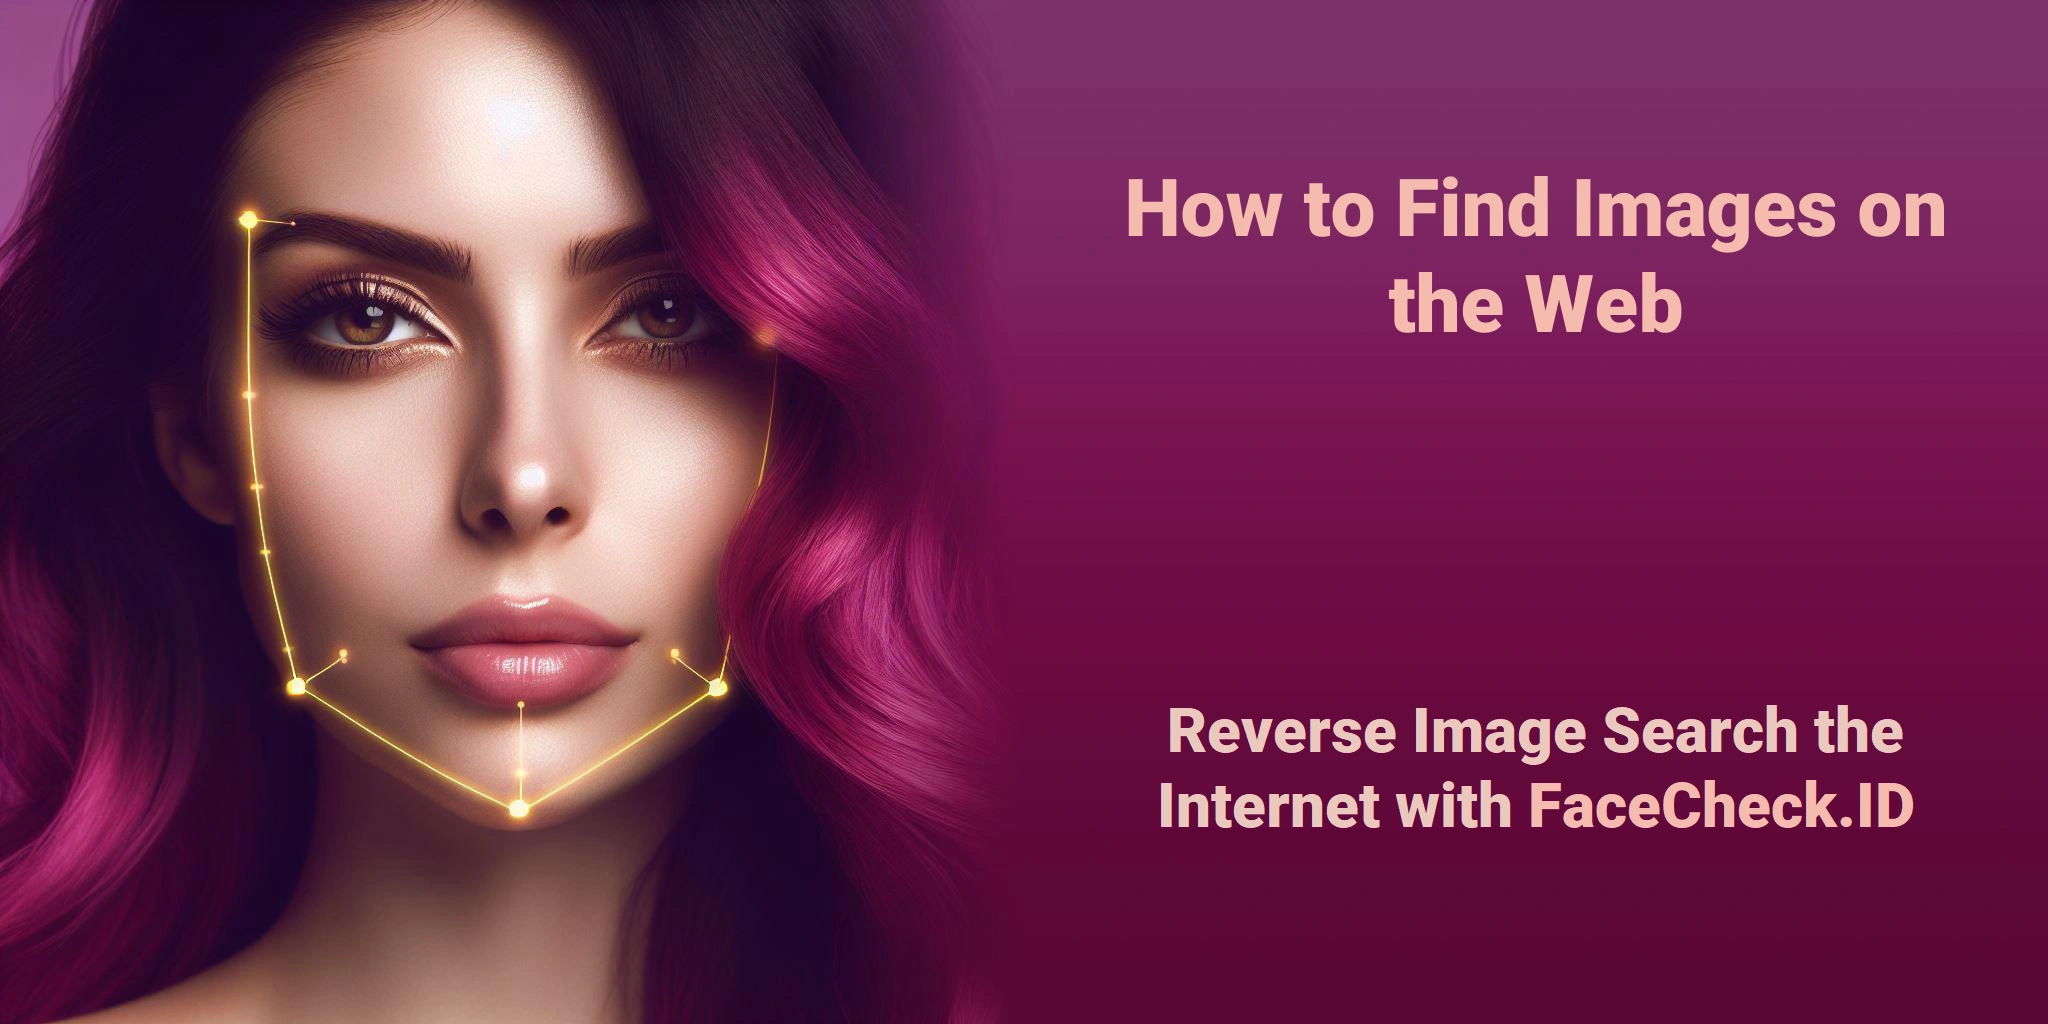 How to Find Images on the Web